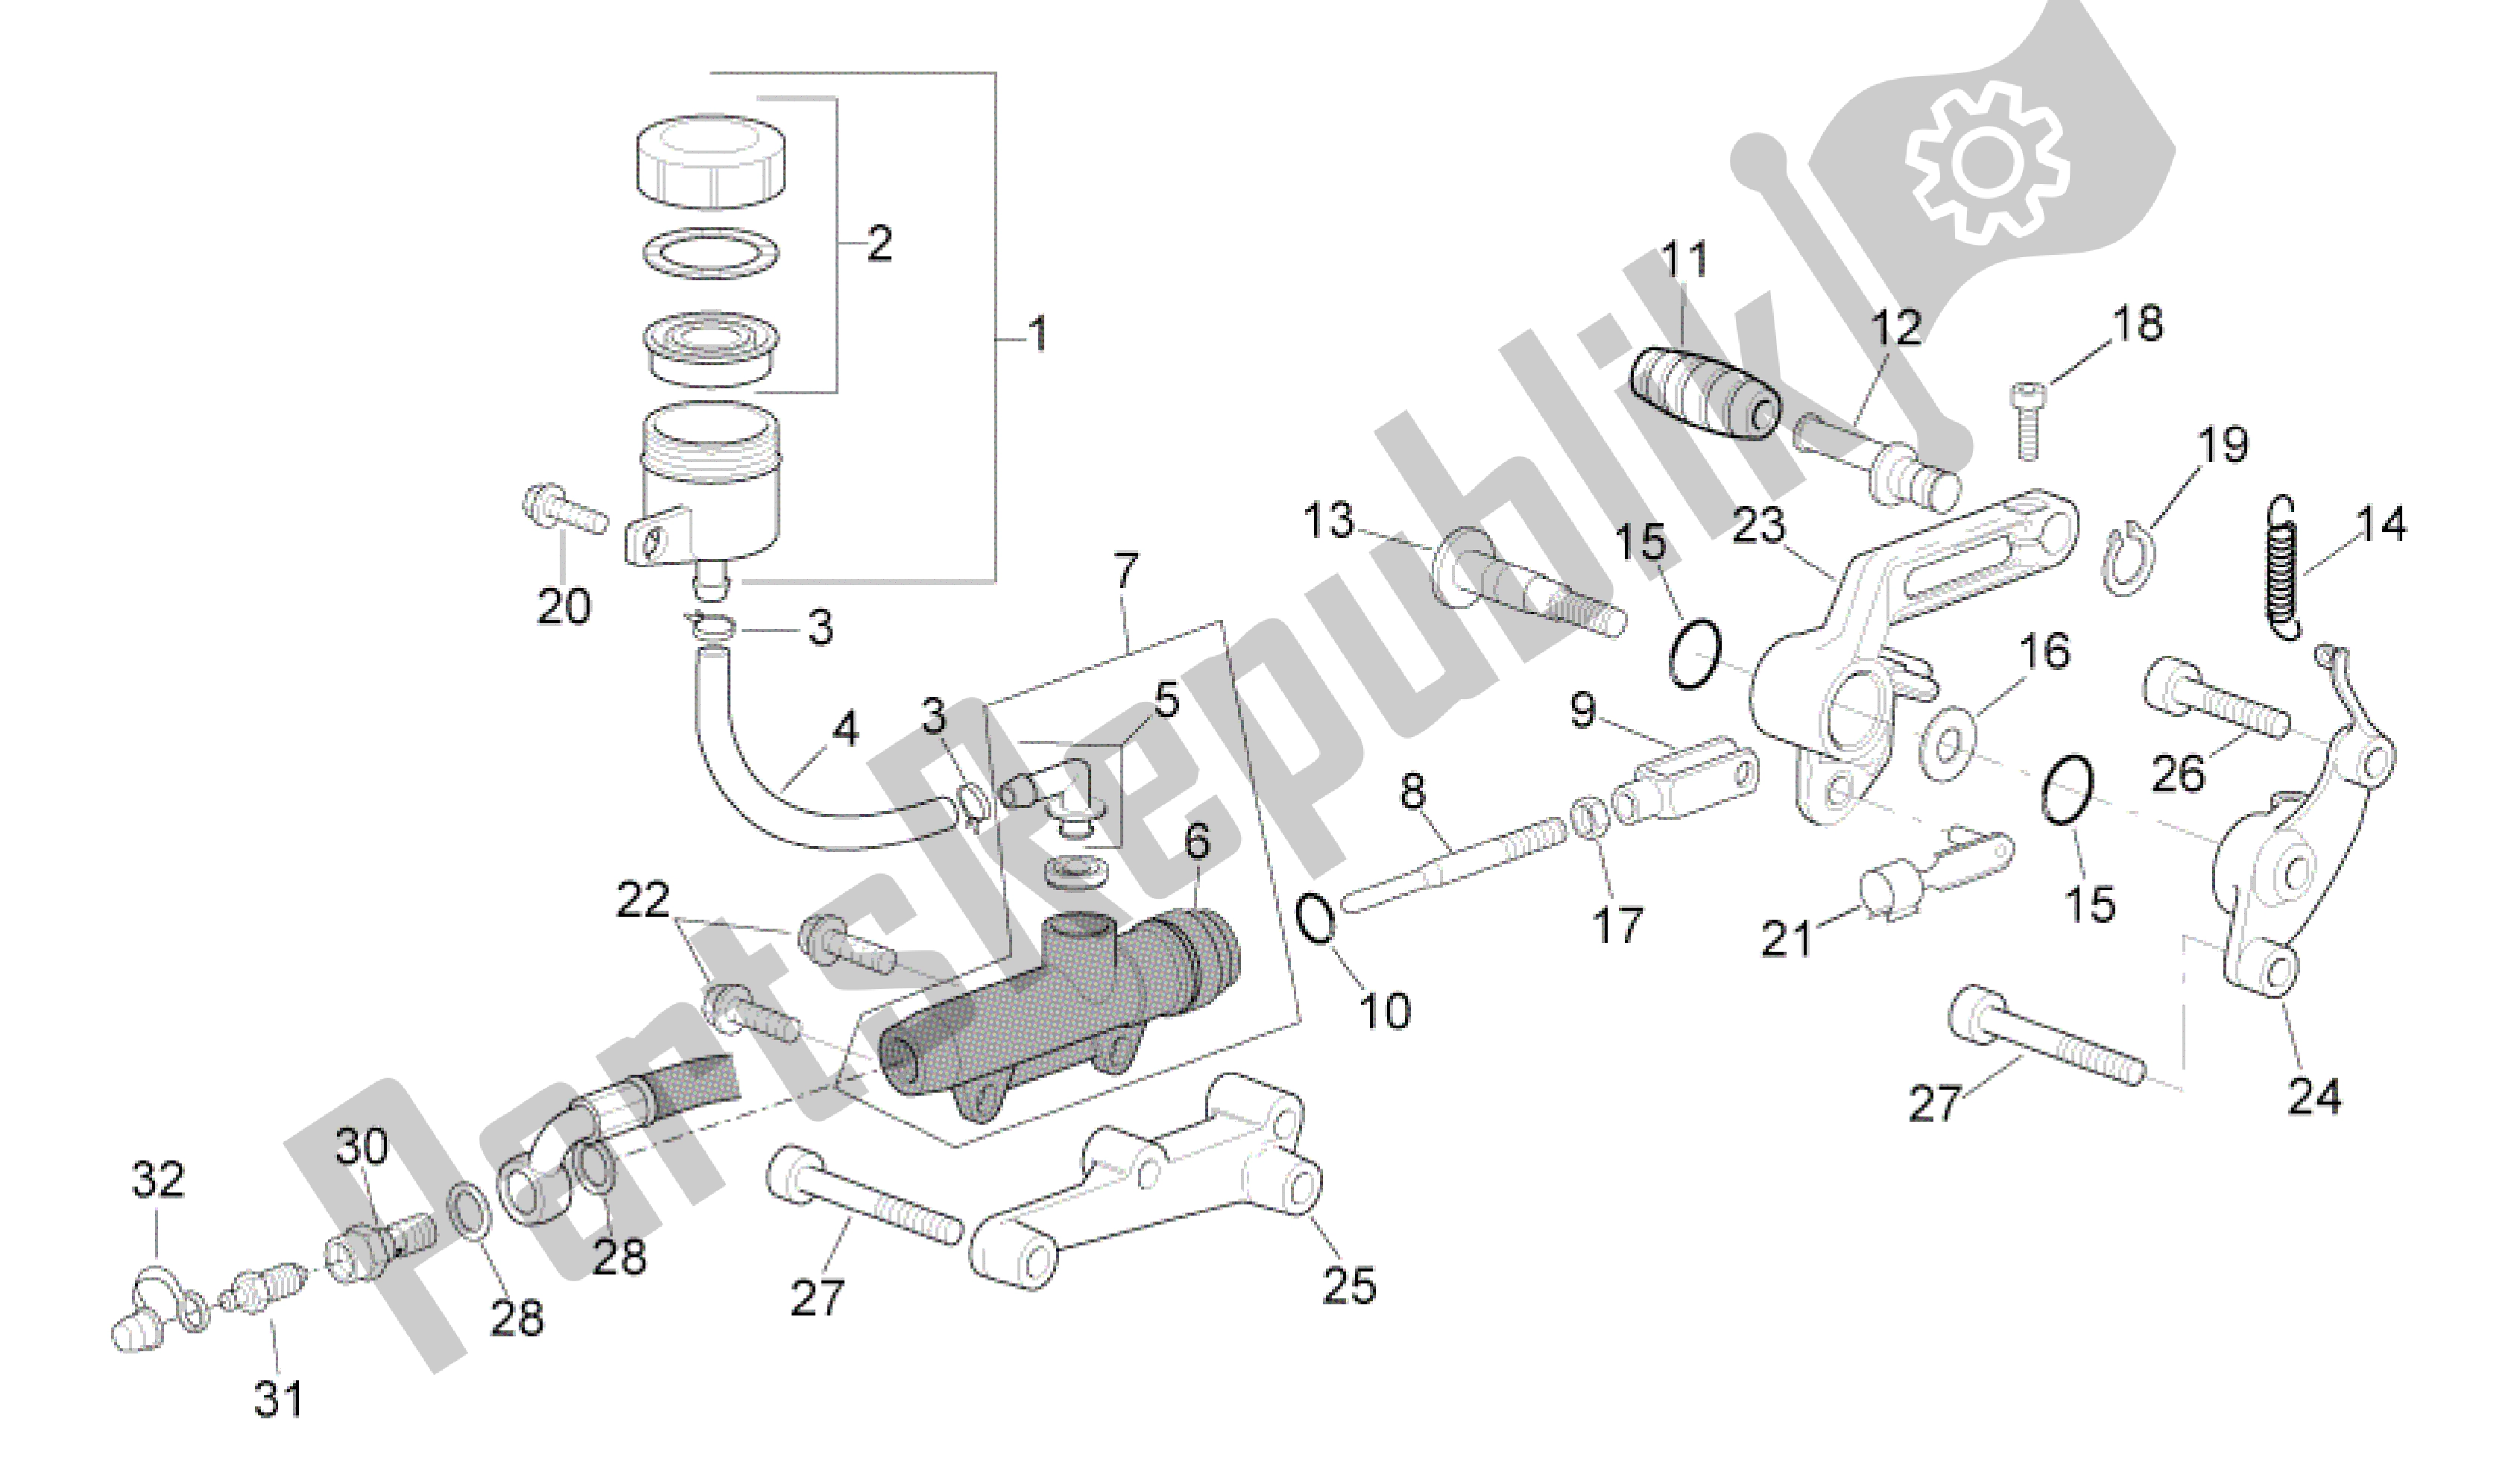 All parts for the Rear Master Cylinder of the Aprilia RSV Mille 3963 1000 2003